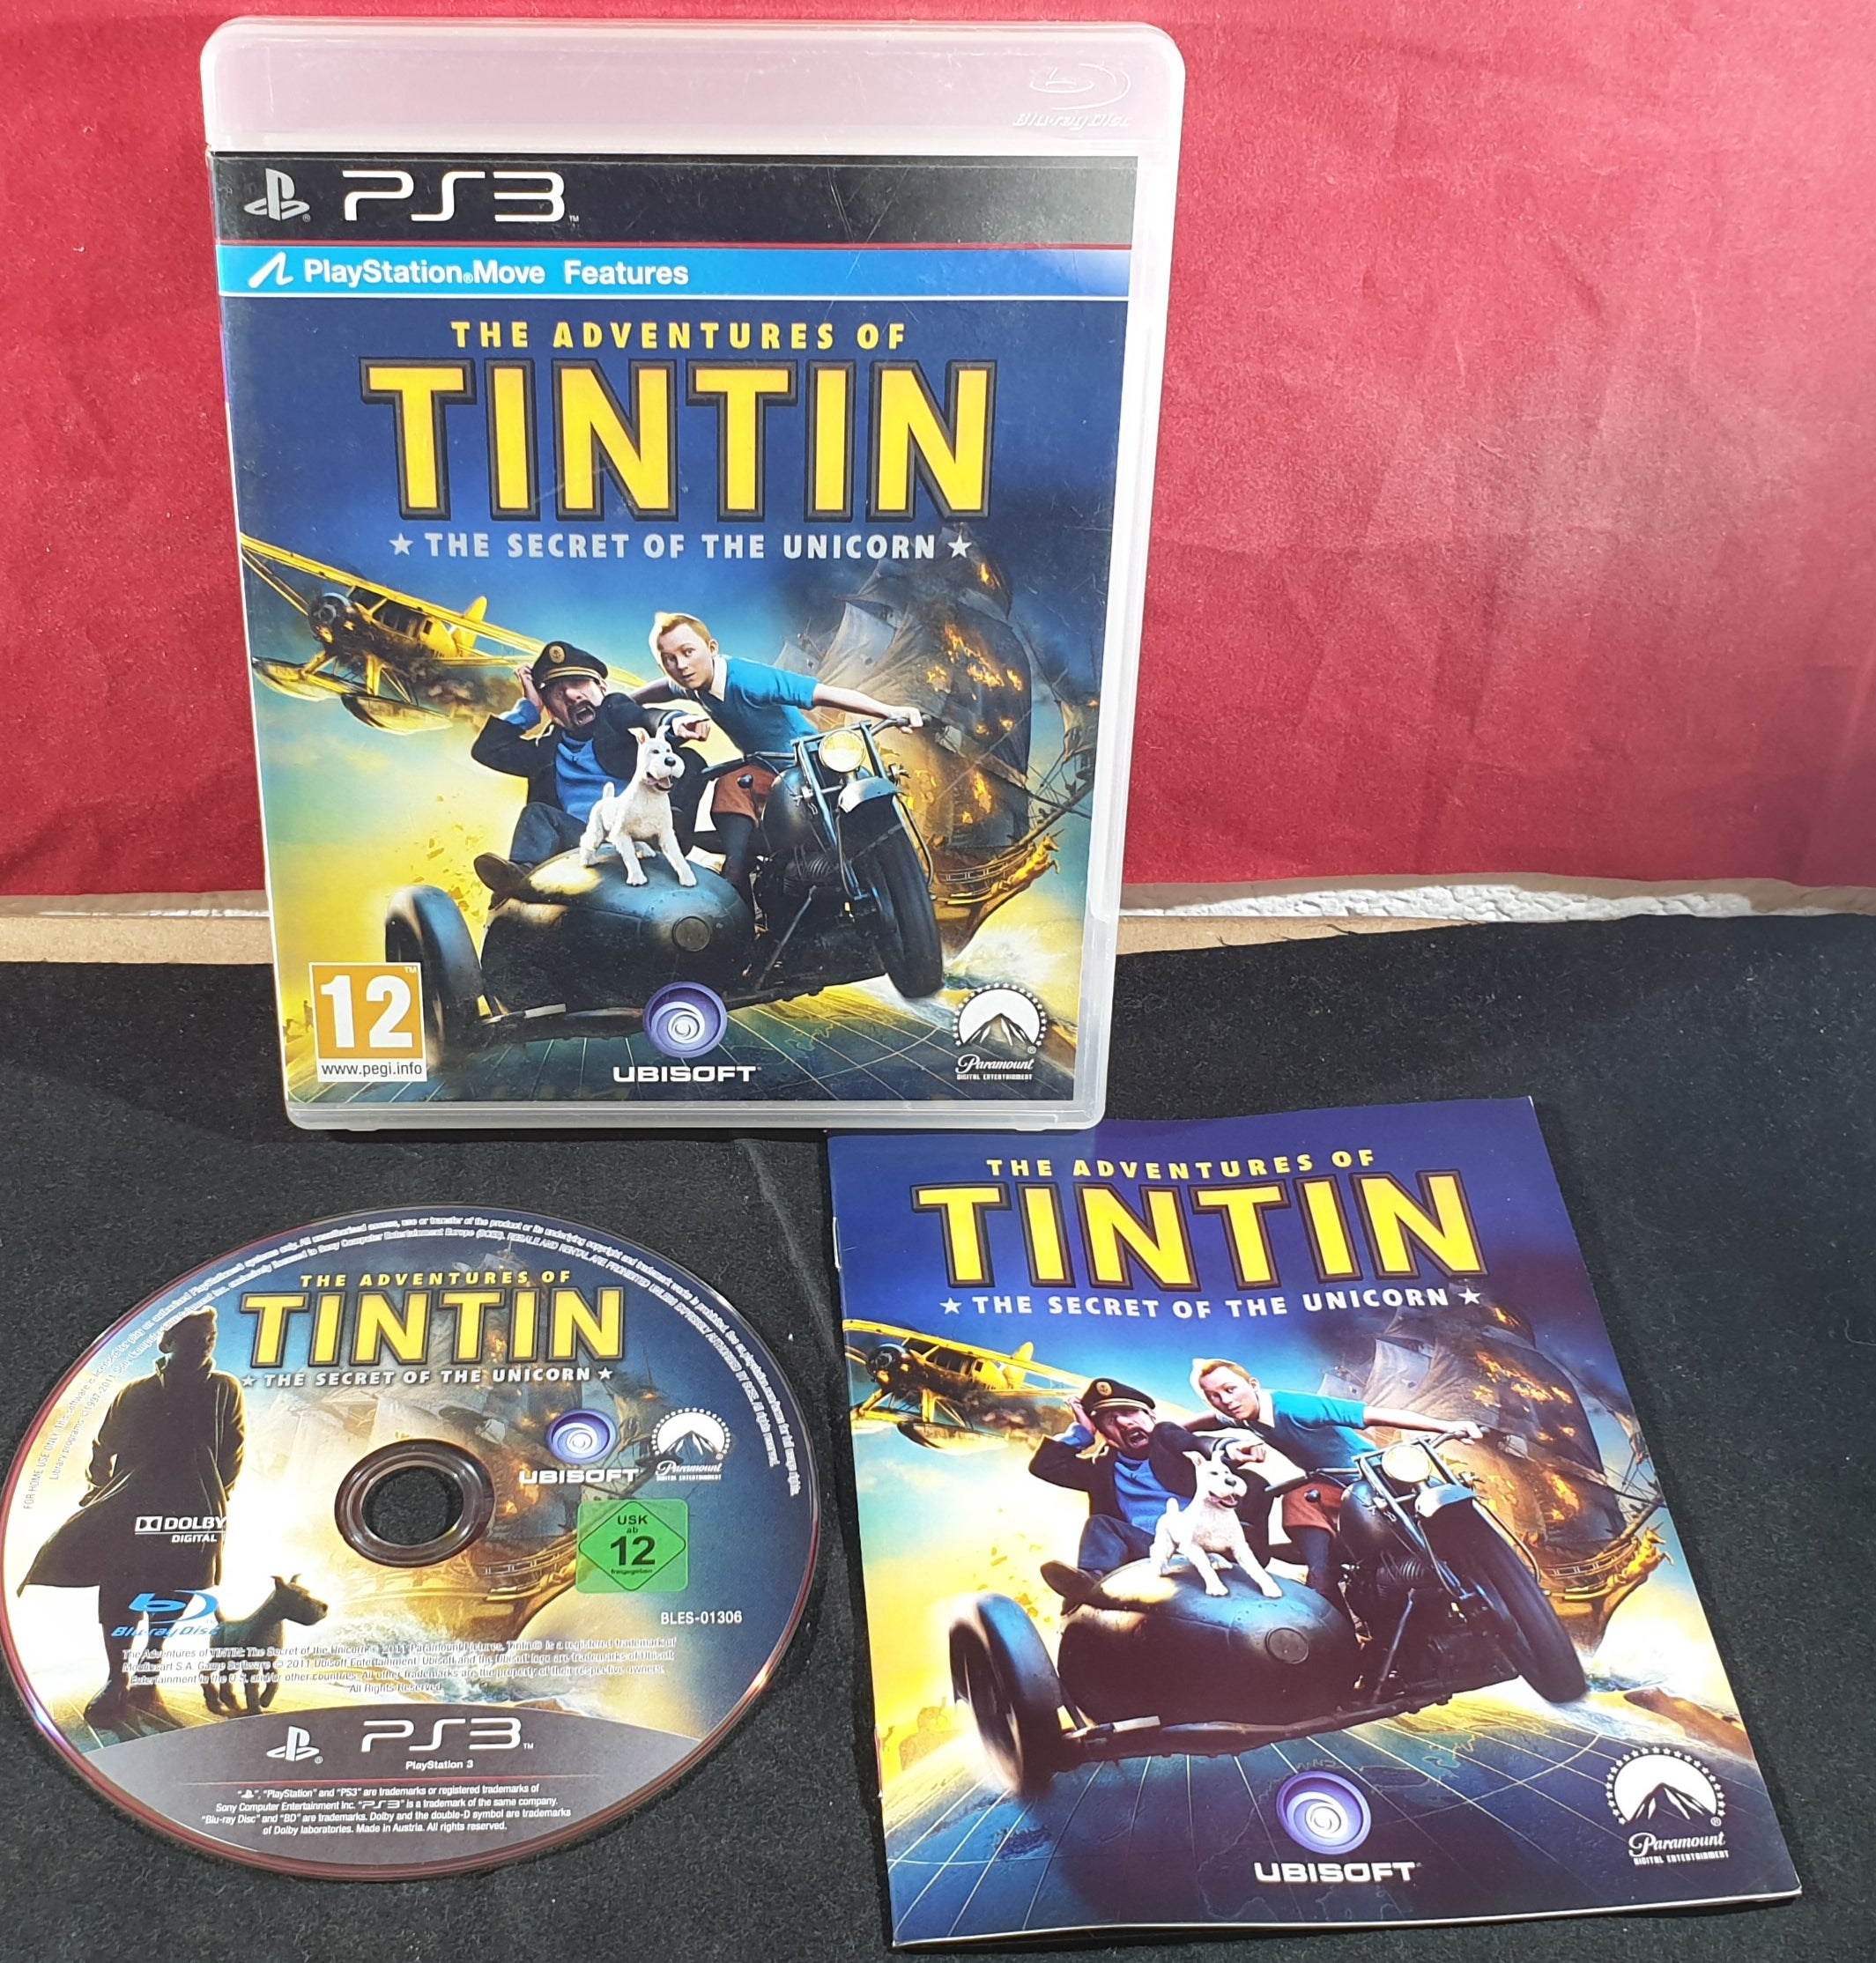 The Adventures of Tintin: The Game - PS3